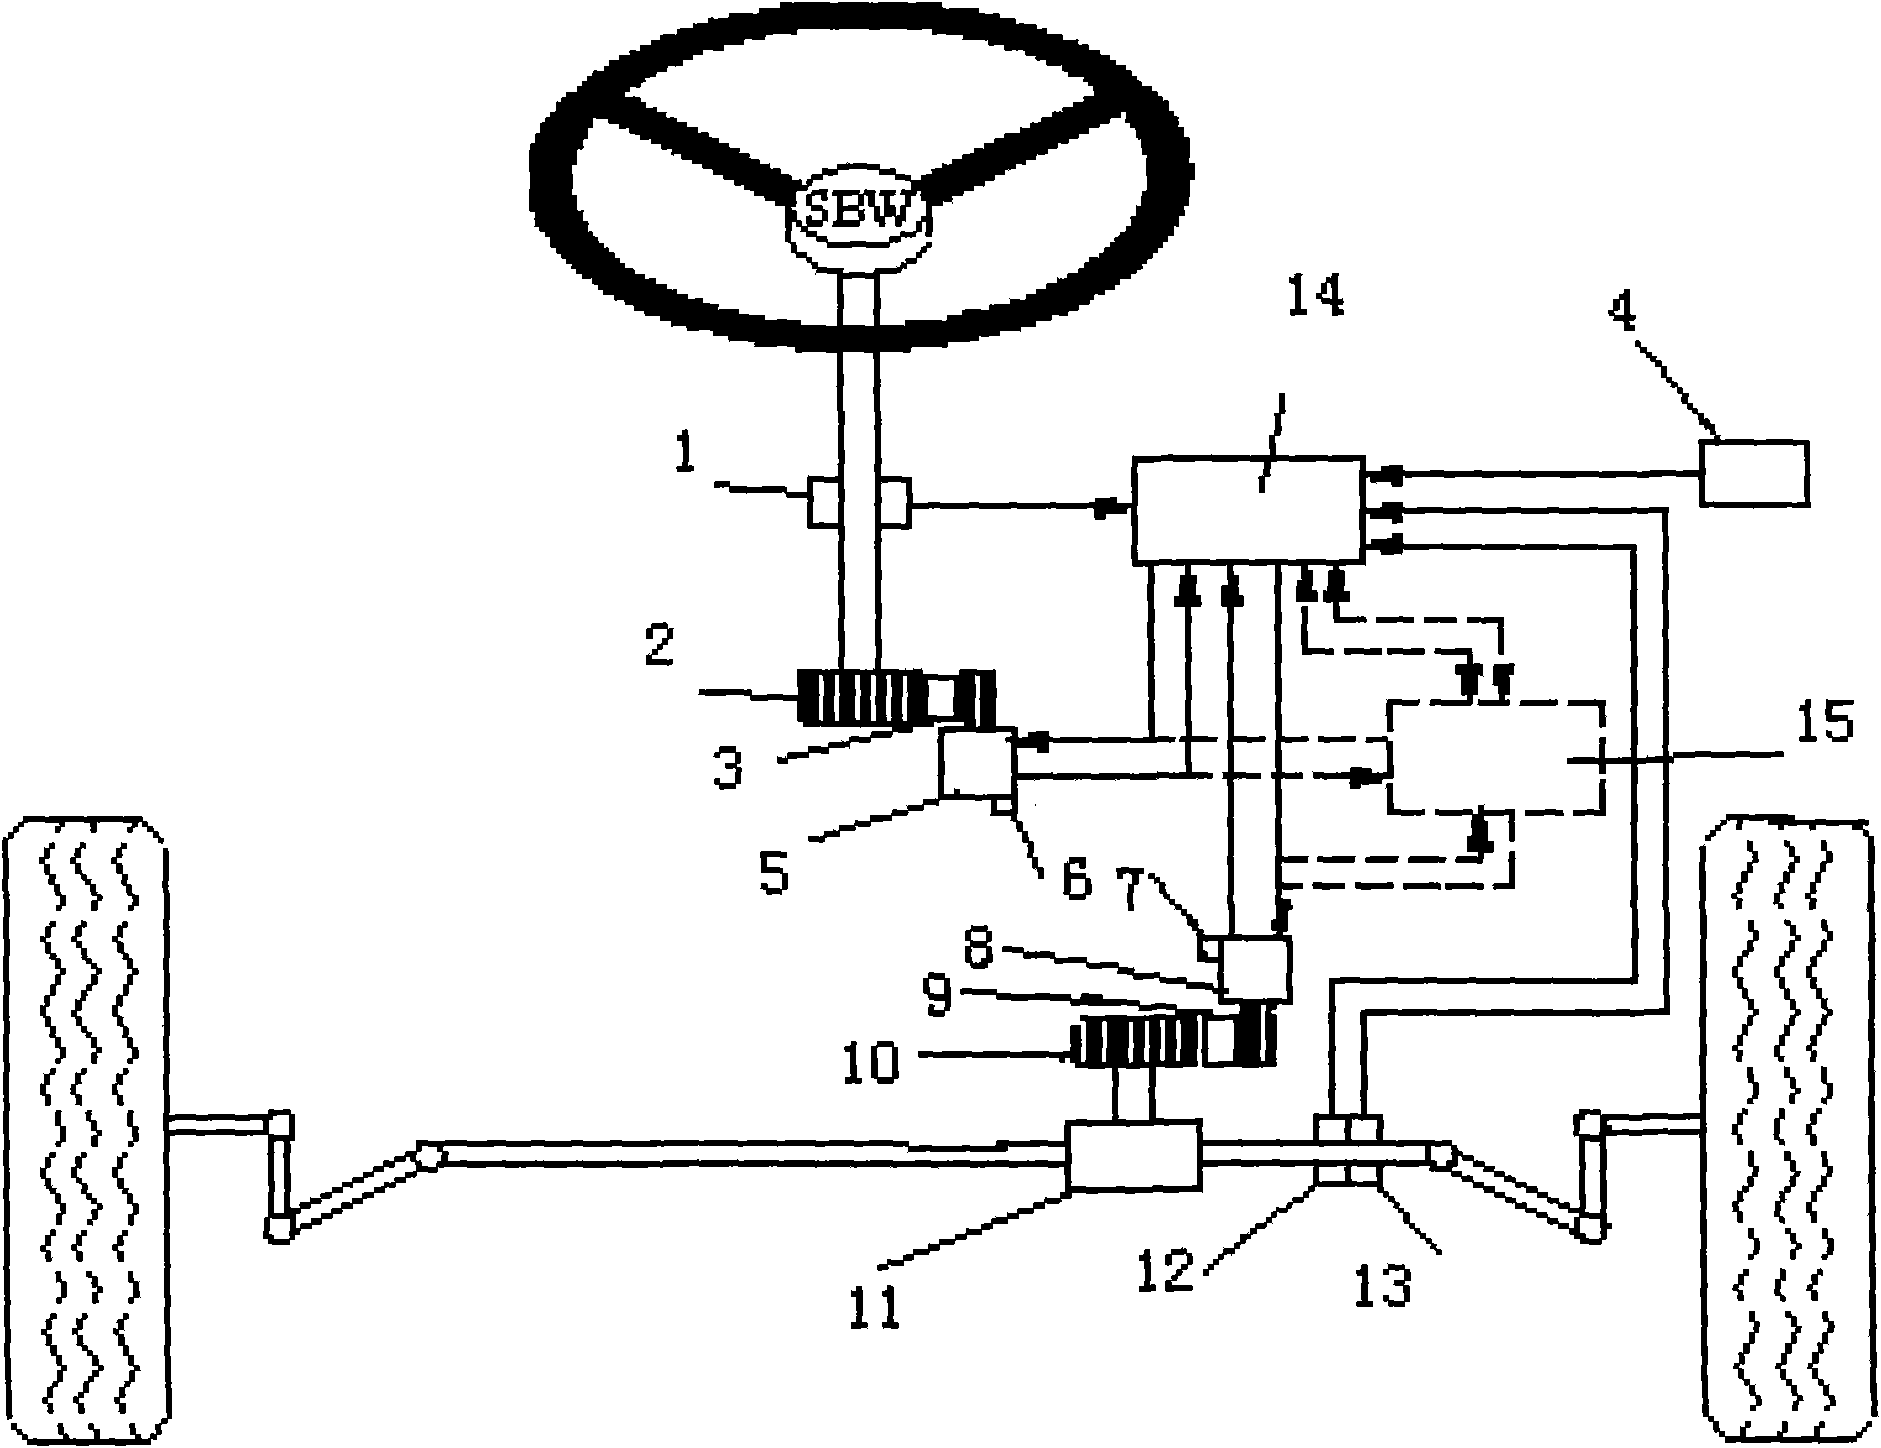 Linear control based automobile steering system